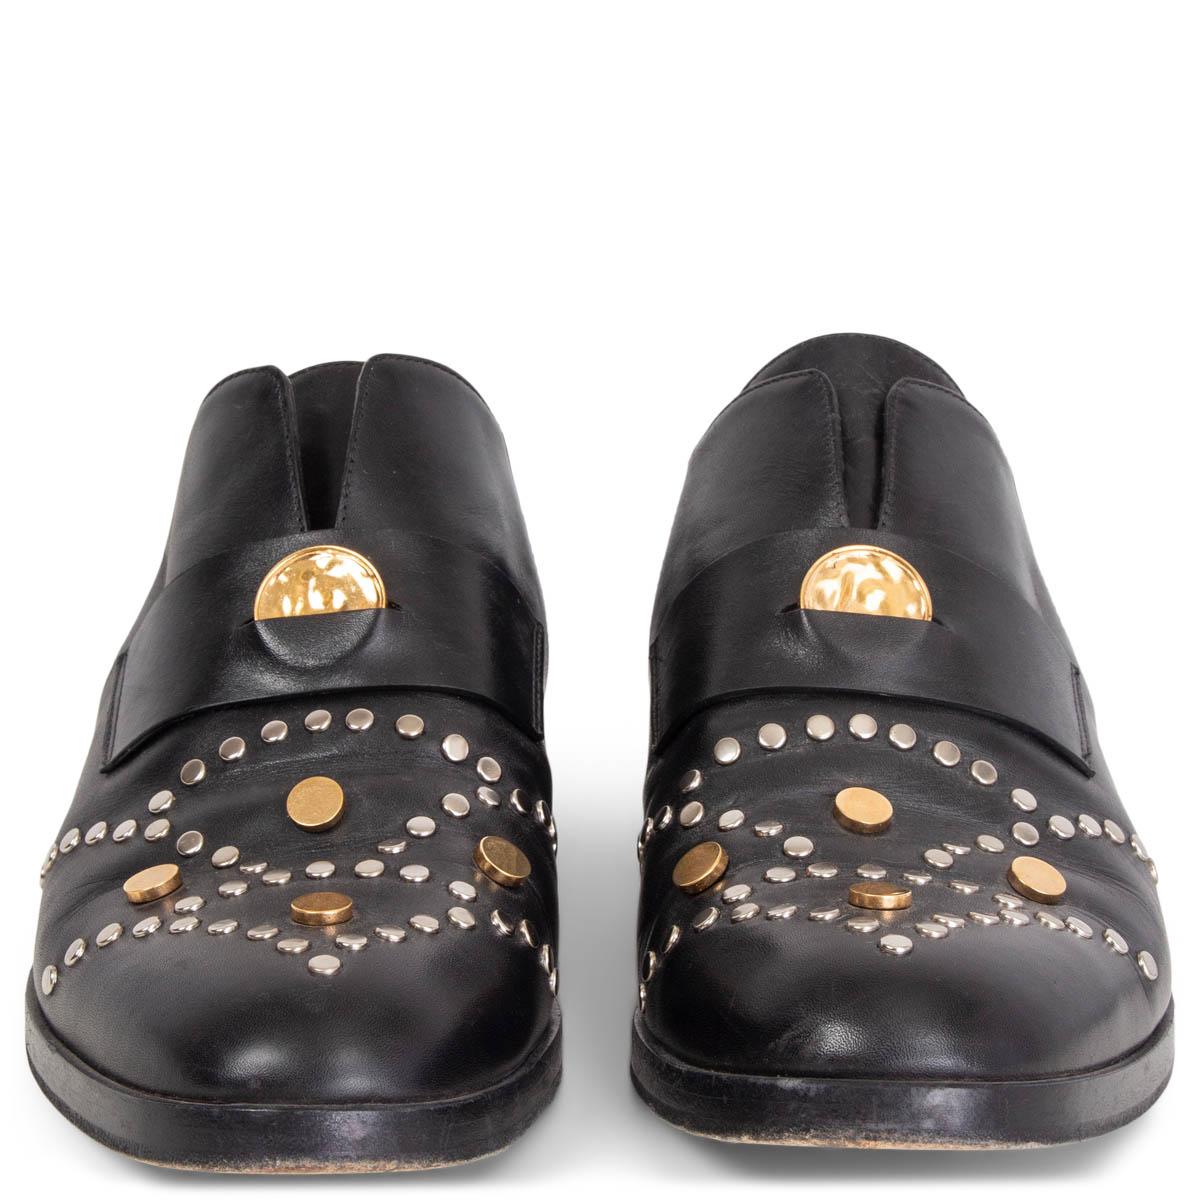 100% authentic Chloé Glory penny loafers in black smooth leather embellished at vamp with gold and silver tone studs and elastic inserts on the side. Have been worn and show some creasing at vamp. Overall in very good condition. Come with dust bags.